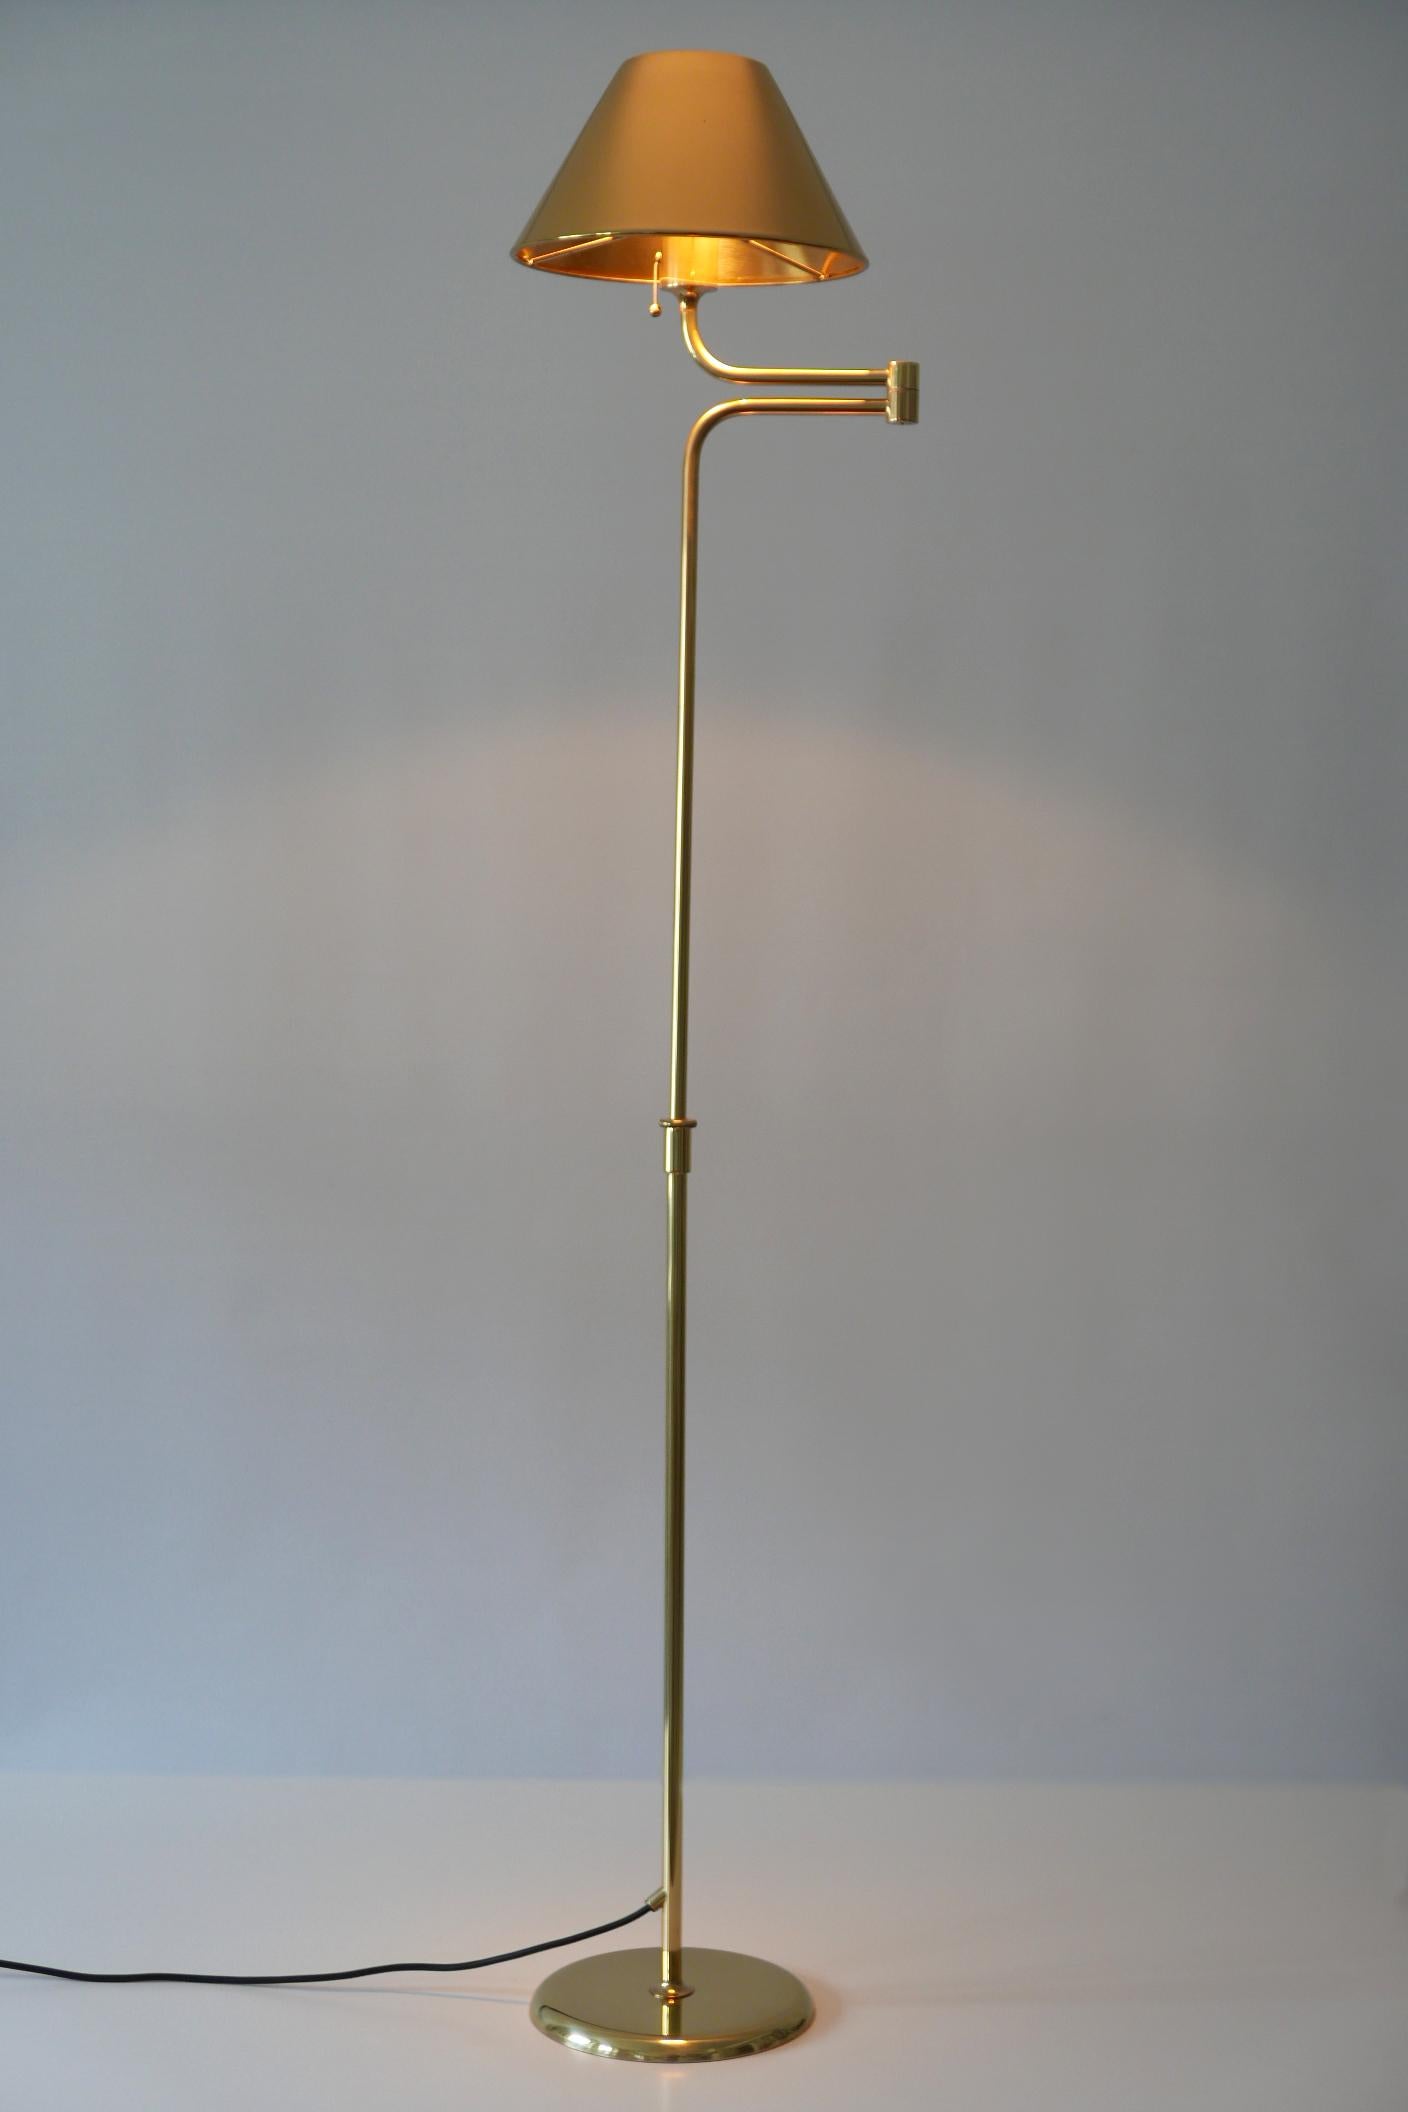 Mid-Century Modern Articulated Brass Floor Lamp or Reading Light by Florian Schulz 1980s Germany